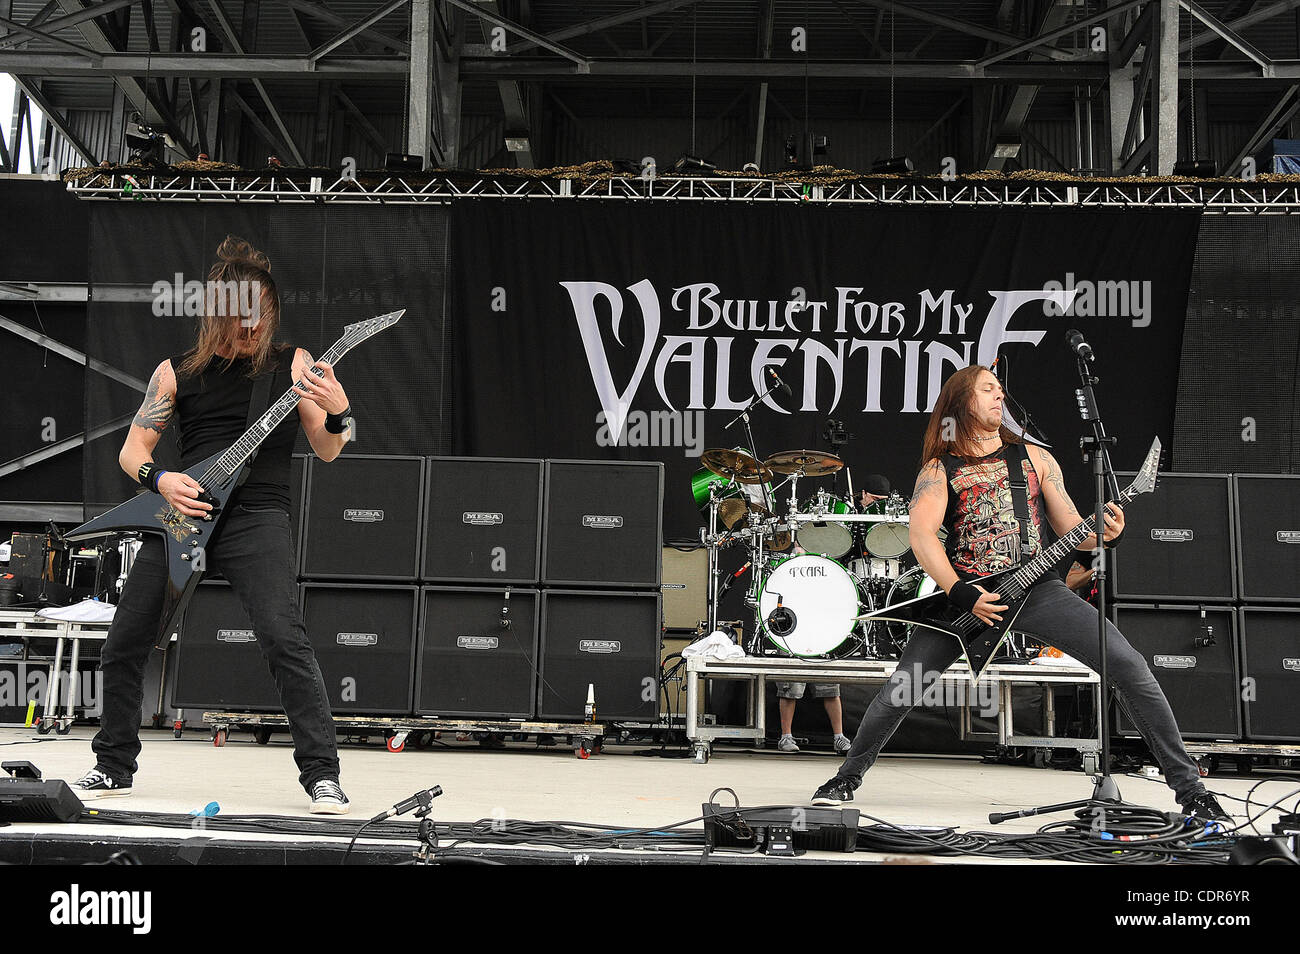 May. 22, 2011 - Columbus, Ohio; USA - (L-R) Guitarist MICHAEL PAGET and Singer / Guitarist MATTHEW TUCK of the band Bullet For My Valentine performs live as part of the 5th Annual Rock on the Range Music Festival that is taking place at the Crew Stadium located in Columbus. Copyright 2011 Jason Moor Stock Photo